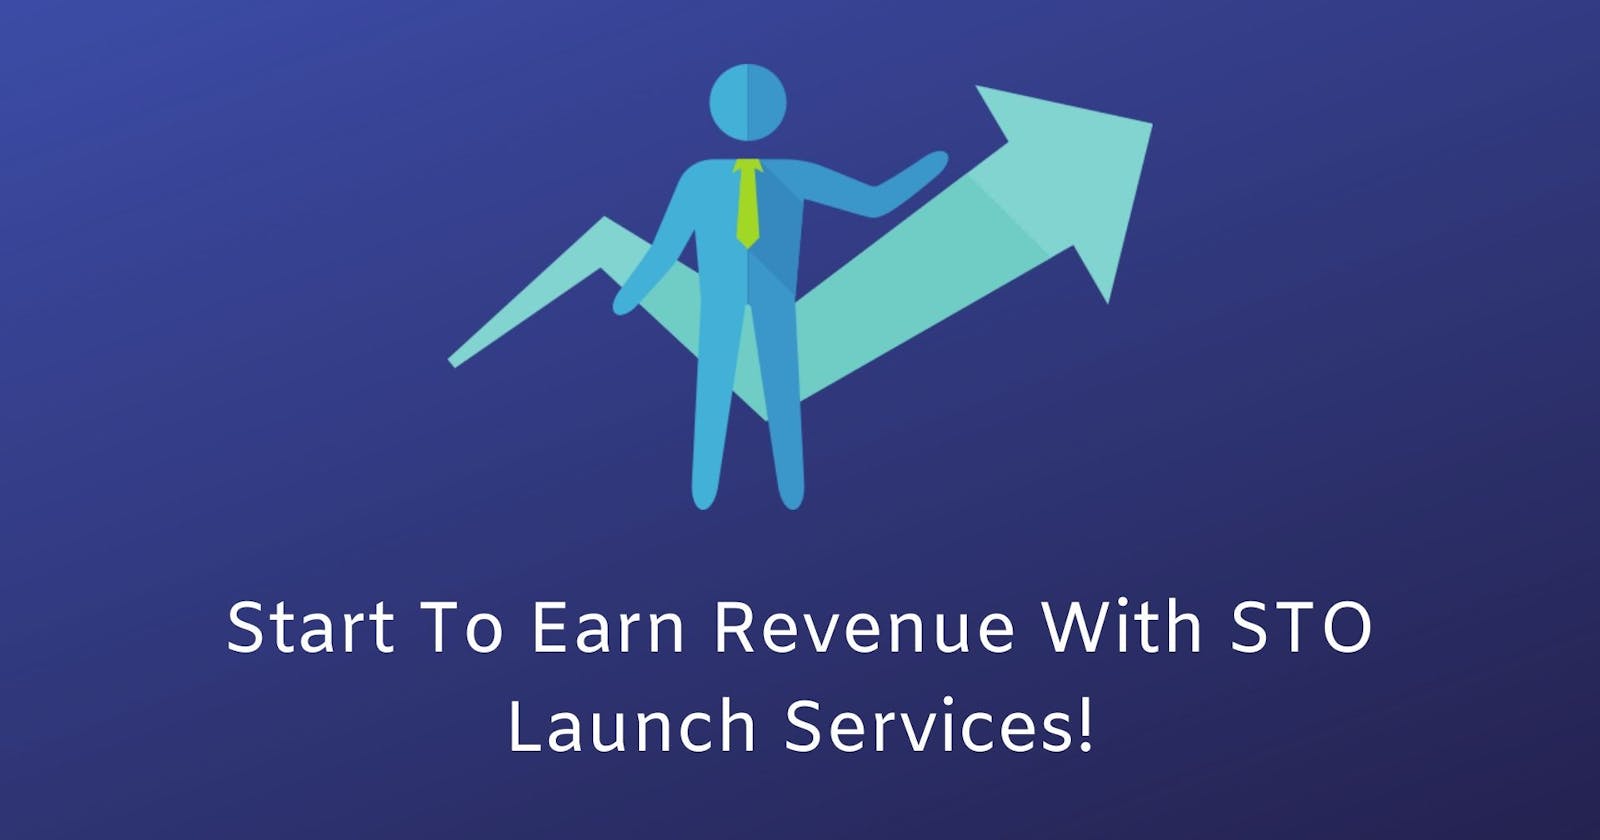 7 Benefits Of STO Launch Services That May Change Your Perspective